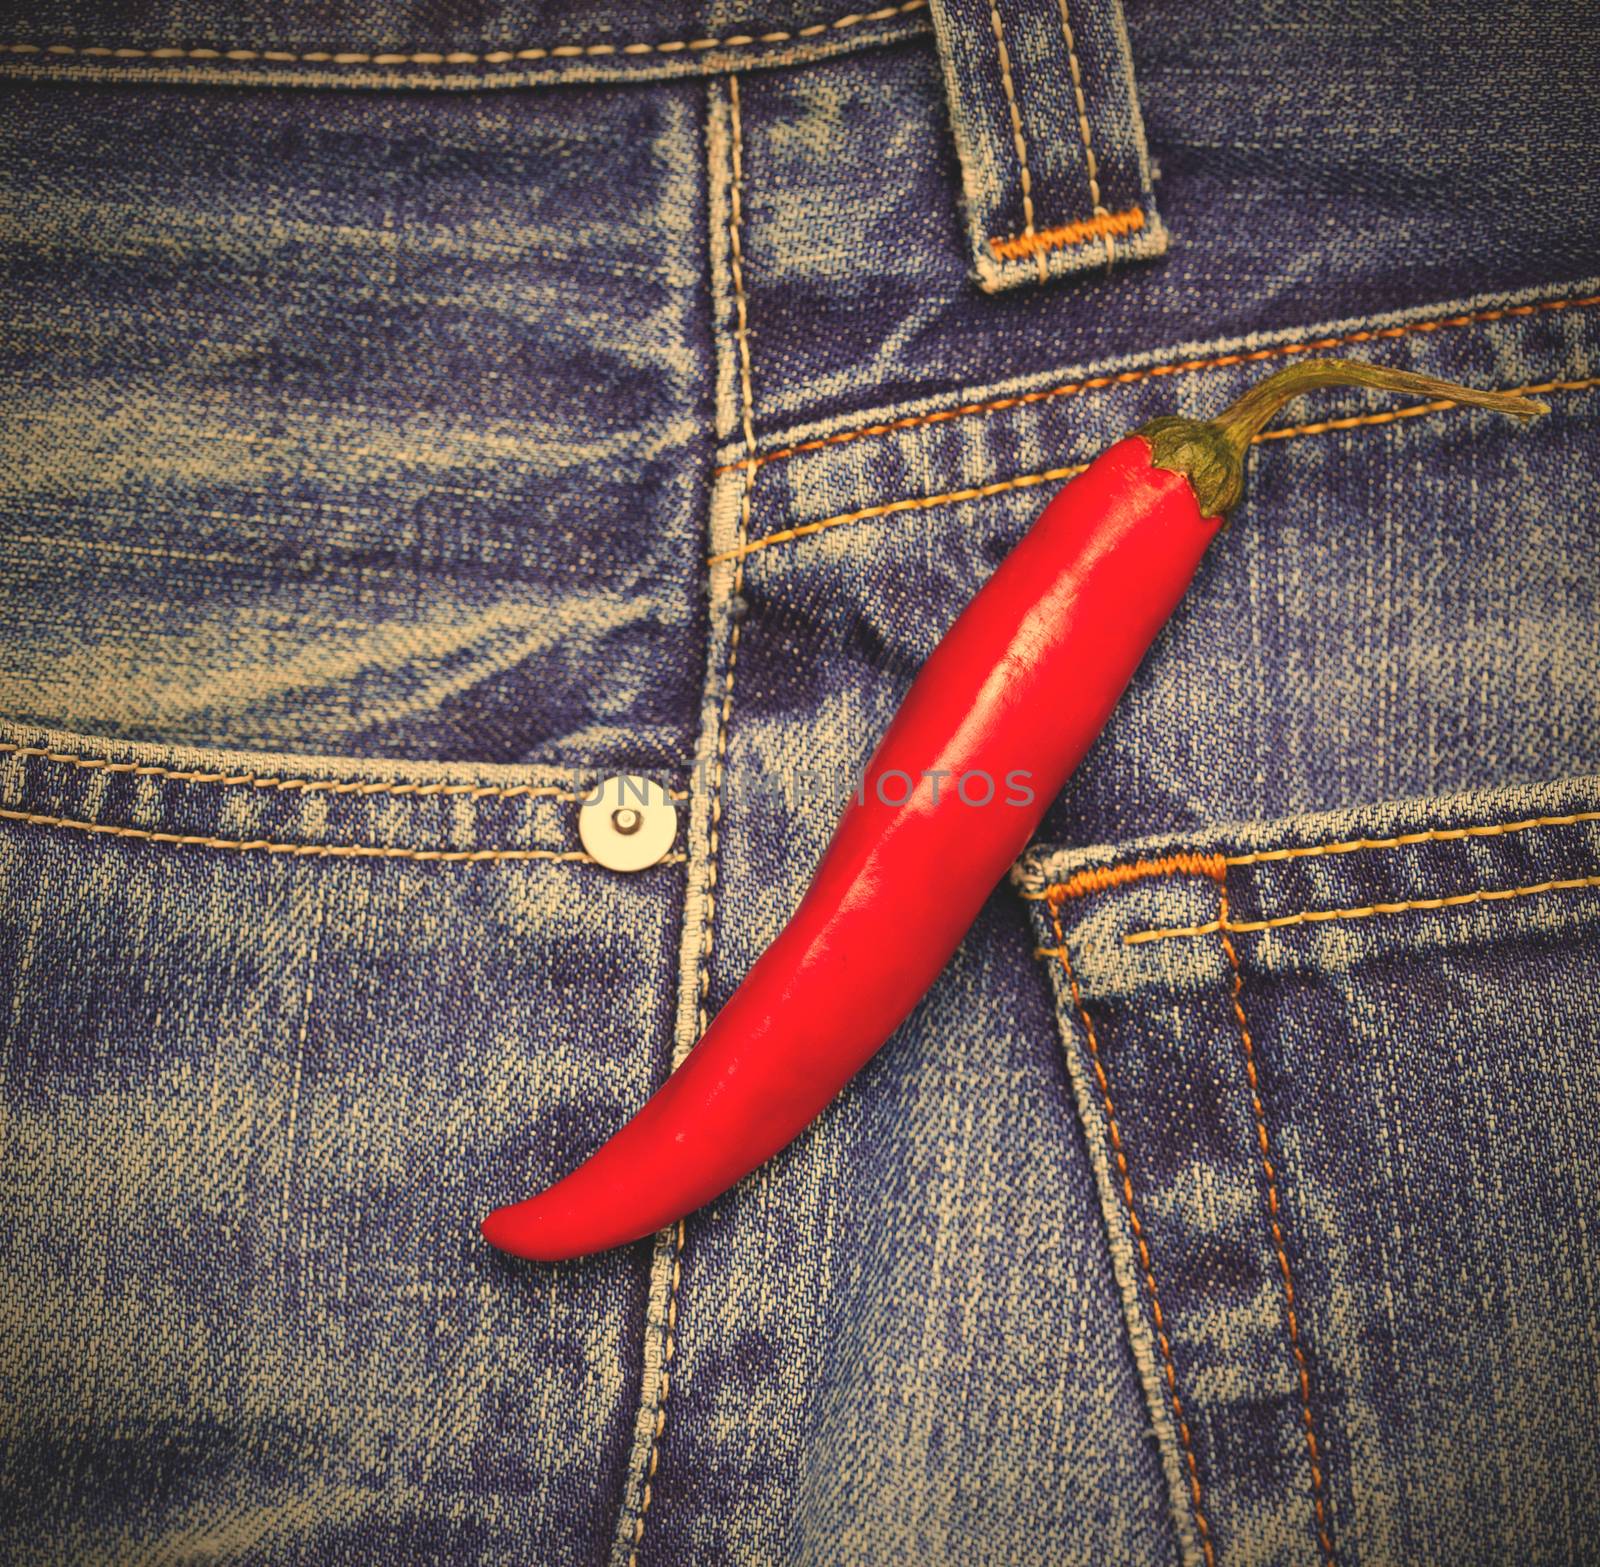 hot chili peppers in a jeans by Astroid